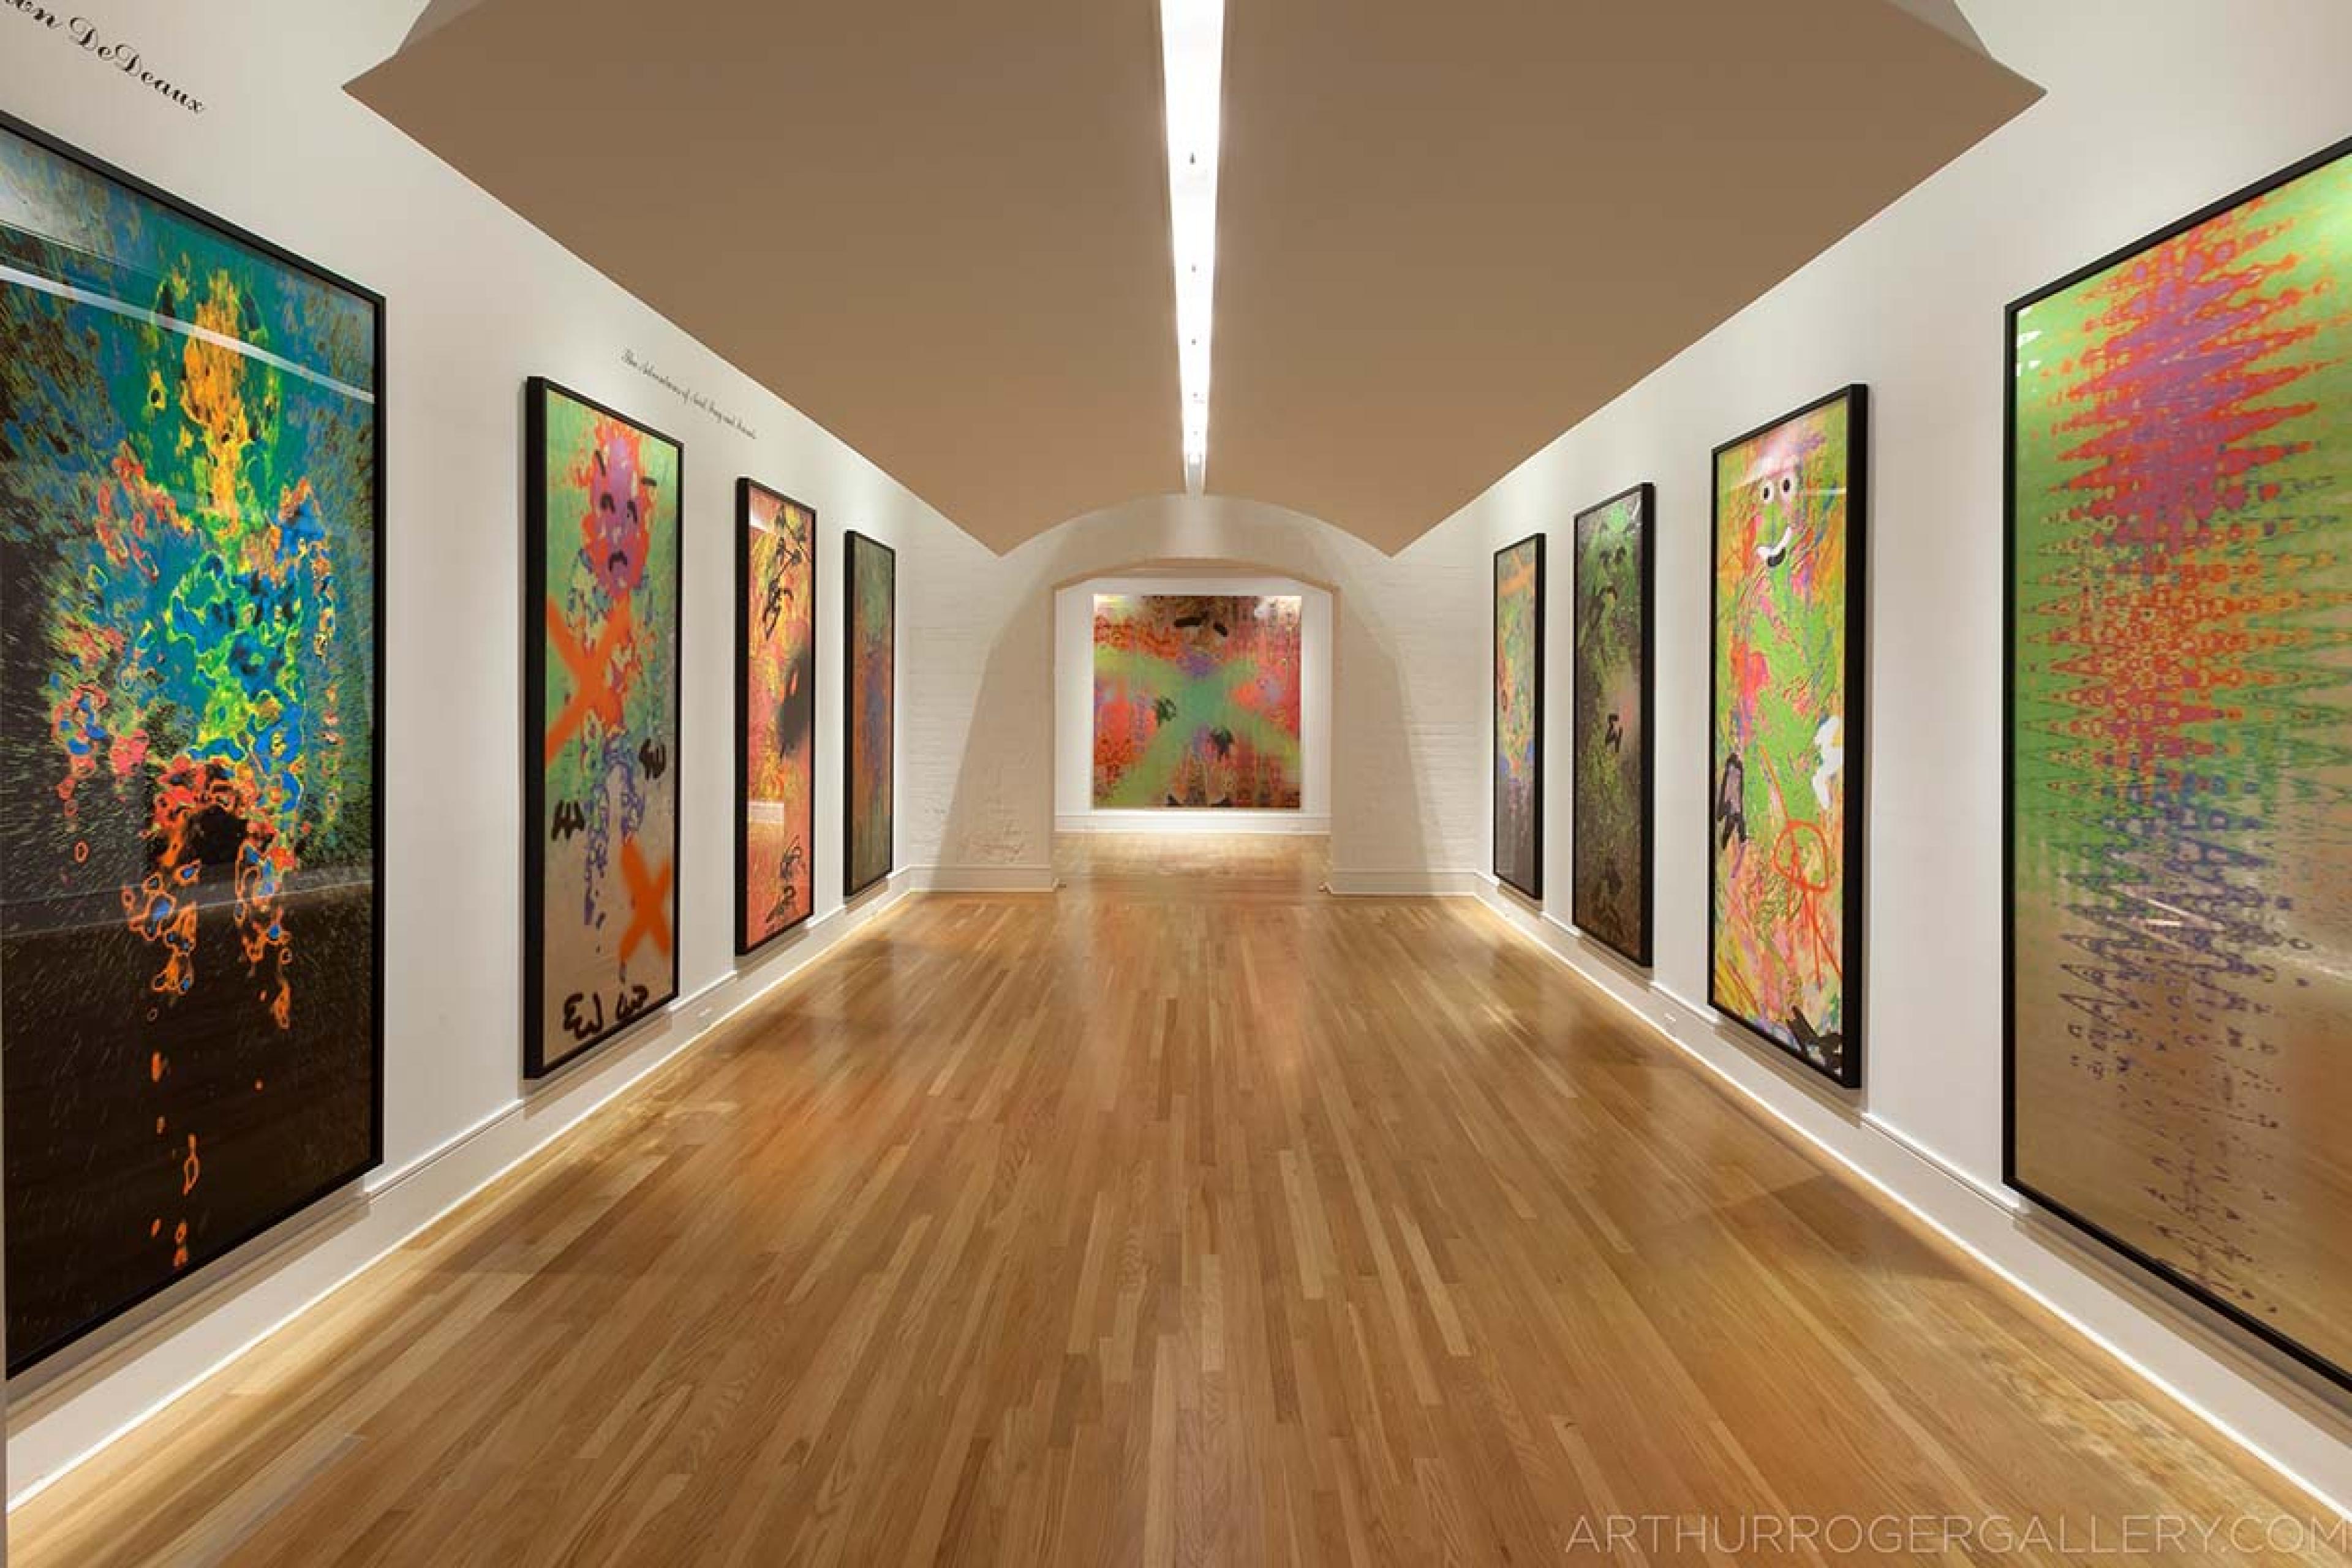 gallery space with polished wooden ceilings and tall paintings lining the white walls